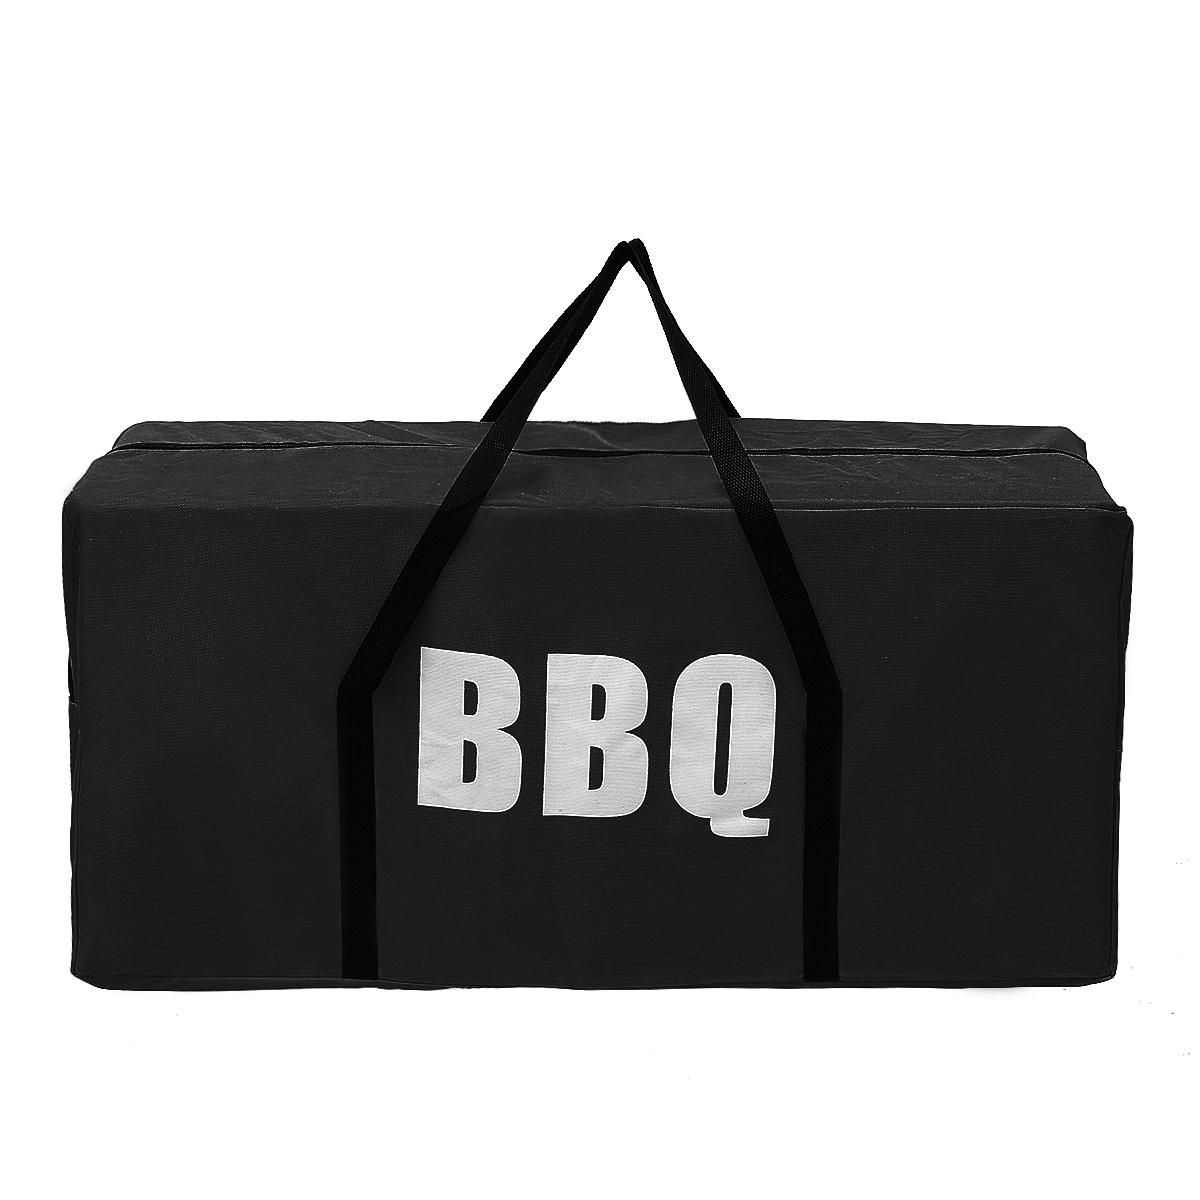 Outdoor Portable BBQ Grill Bag Oxford Camping Picnic Cooking Stove Carry Pouch